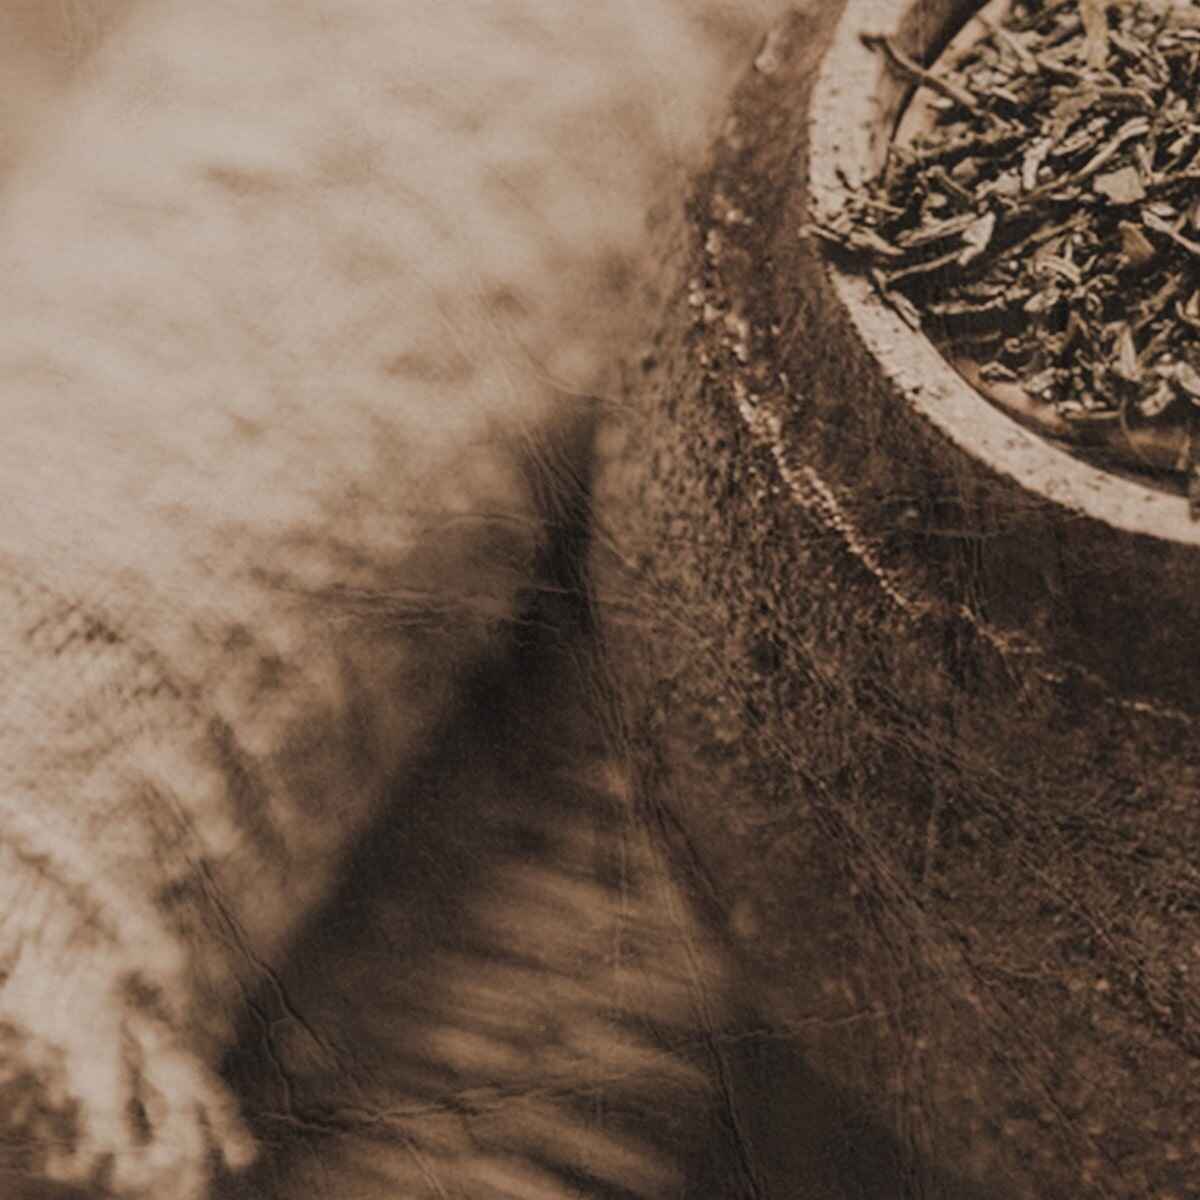 Dry tea leaves in a wooden bowl next to a piece of linen fabric, representing the work of Wheelhouse, a holistic health and healing studio opening in Lisbon, Portugal.